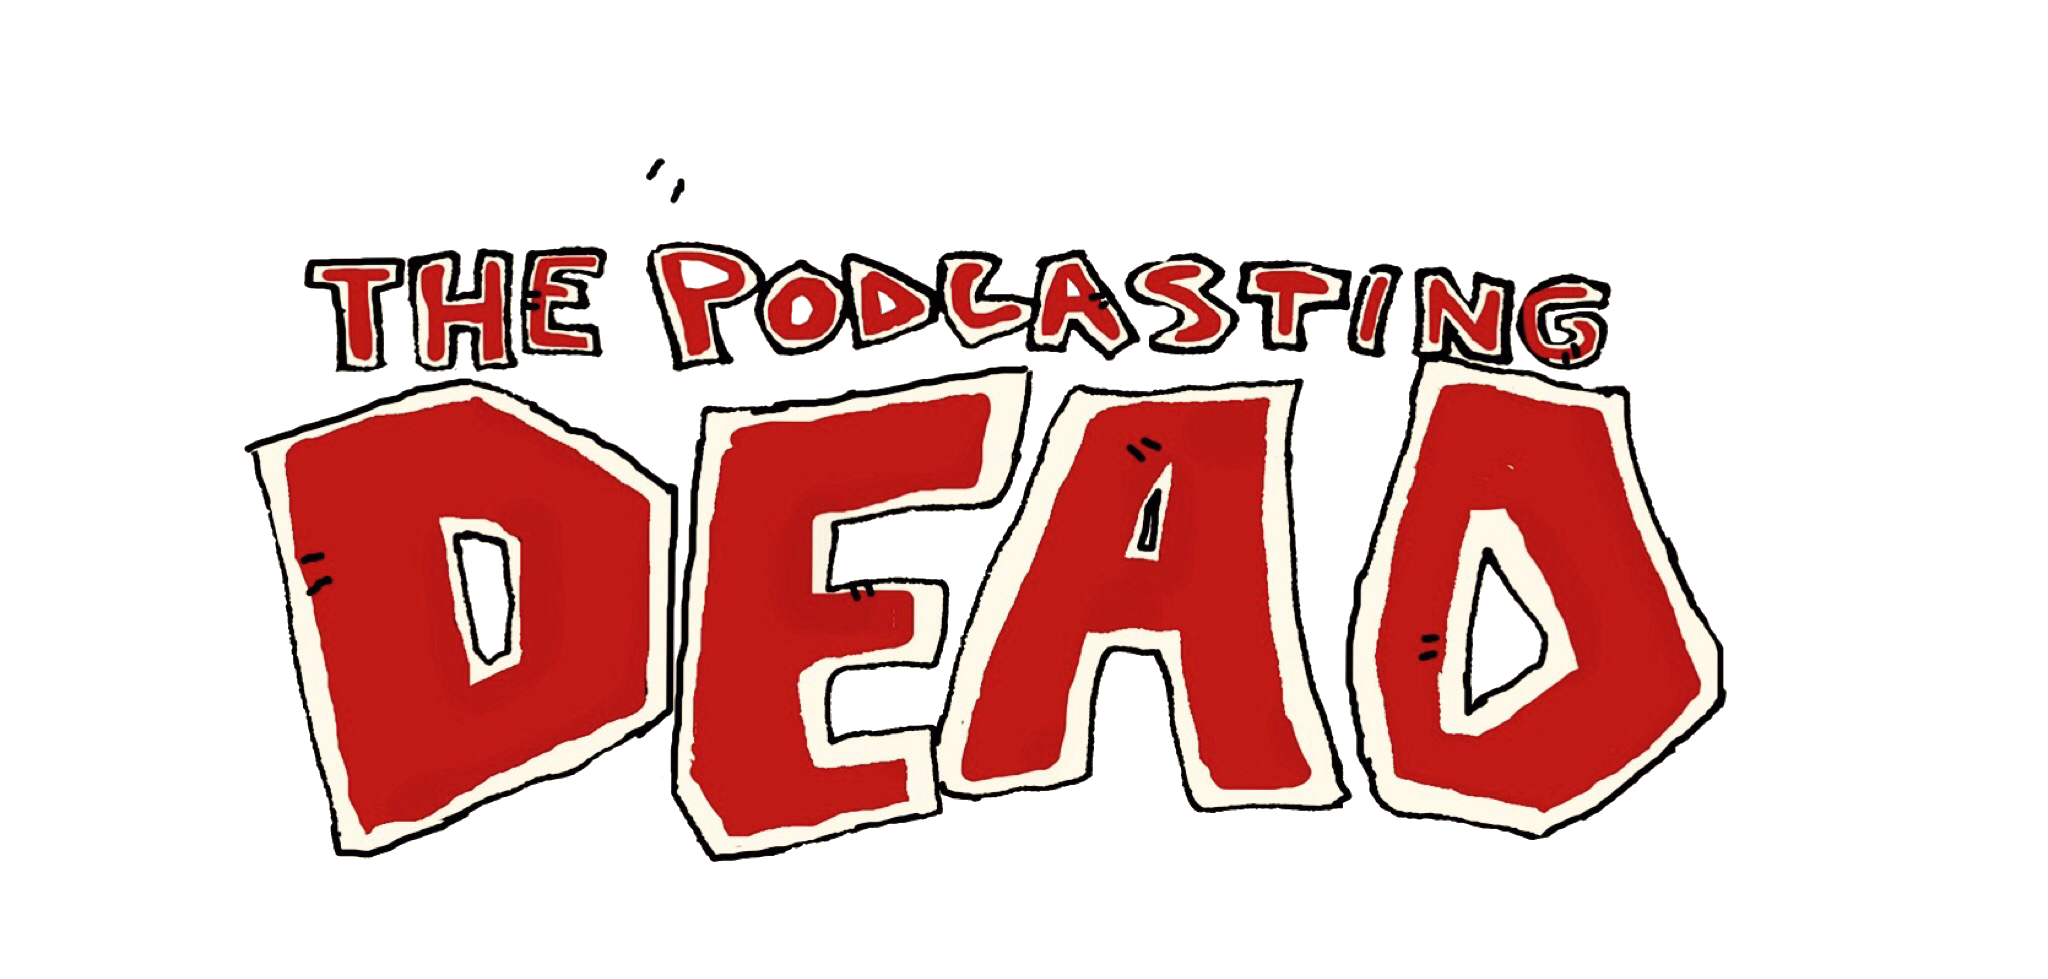 The Podcasting Dead - Sarlacc Digest Host Darth Moocher joins the conversation of Season 4 Episode 9 